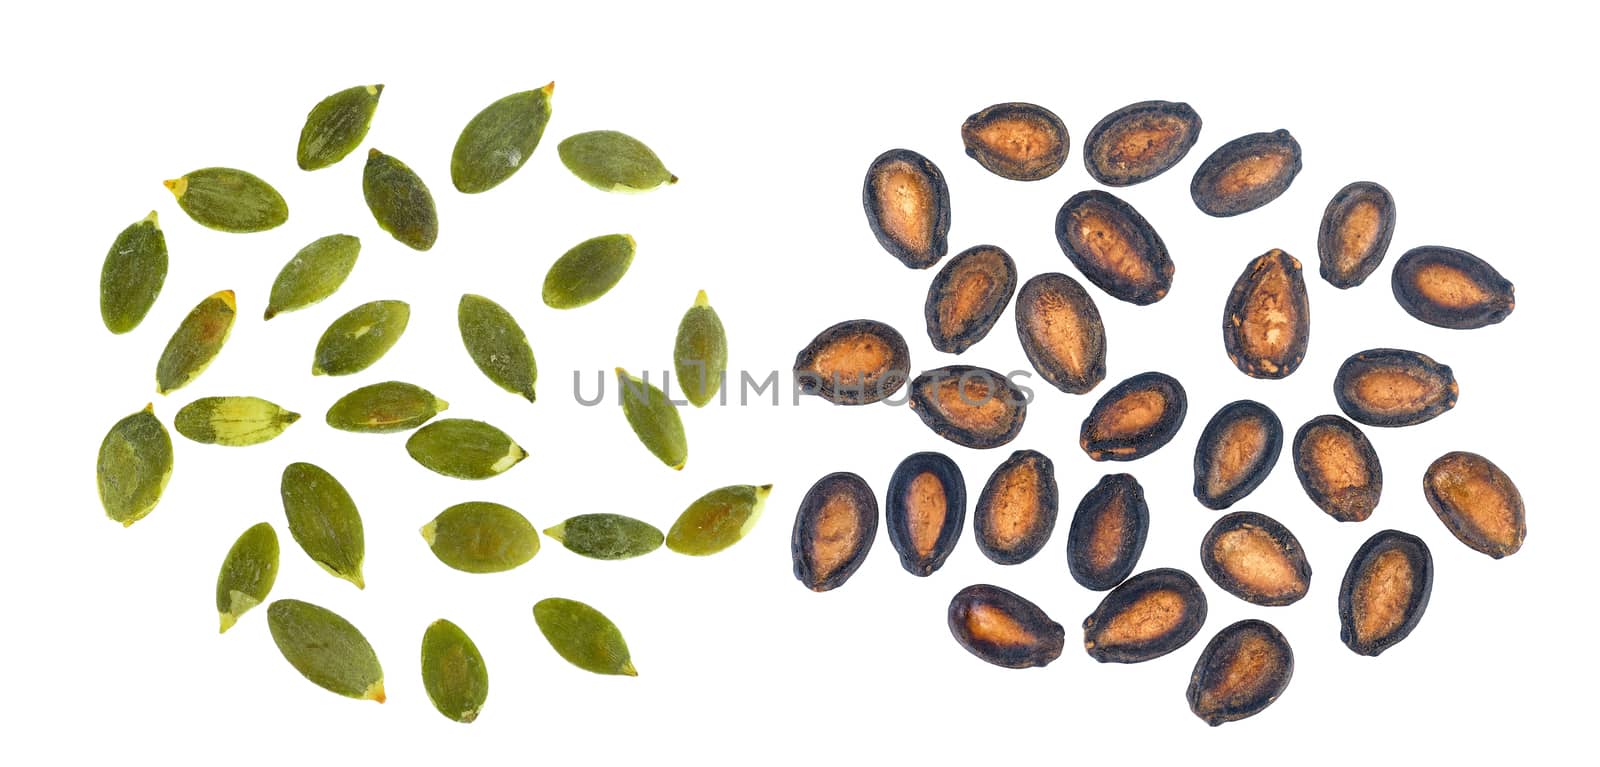 watermelon and pumpkin seeds and isolated on white background